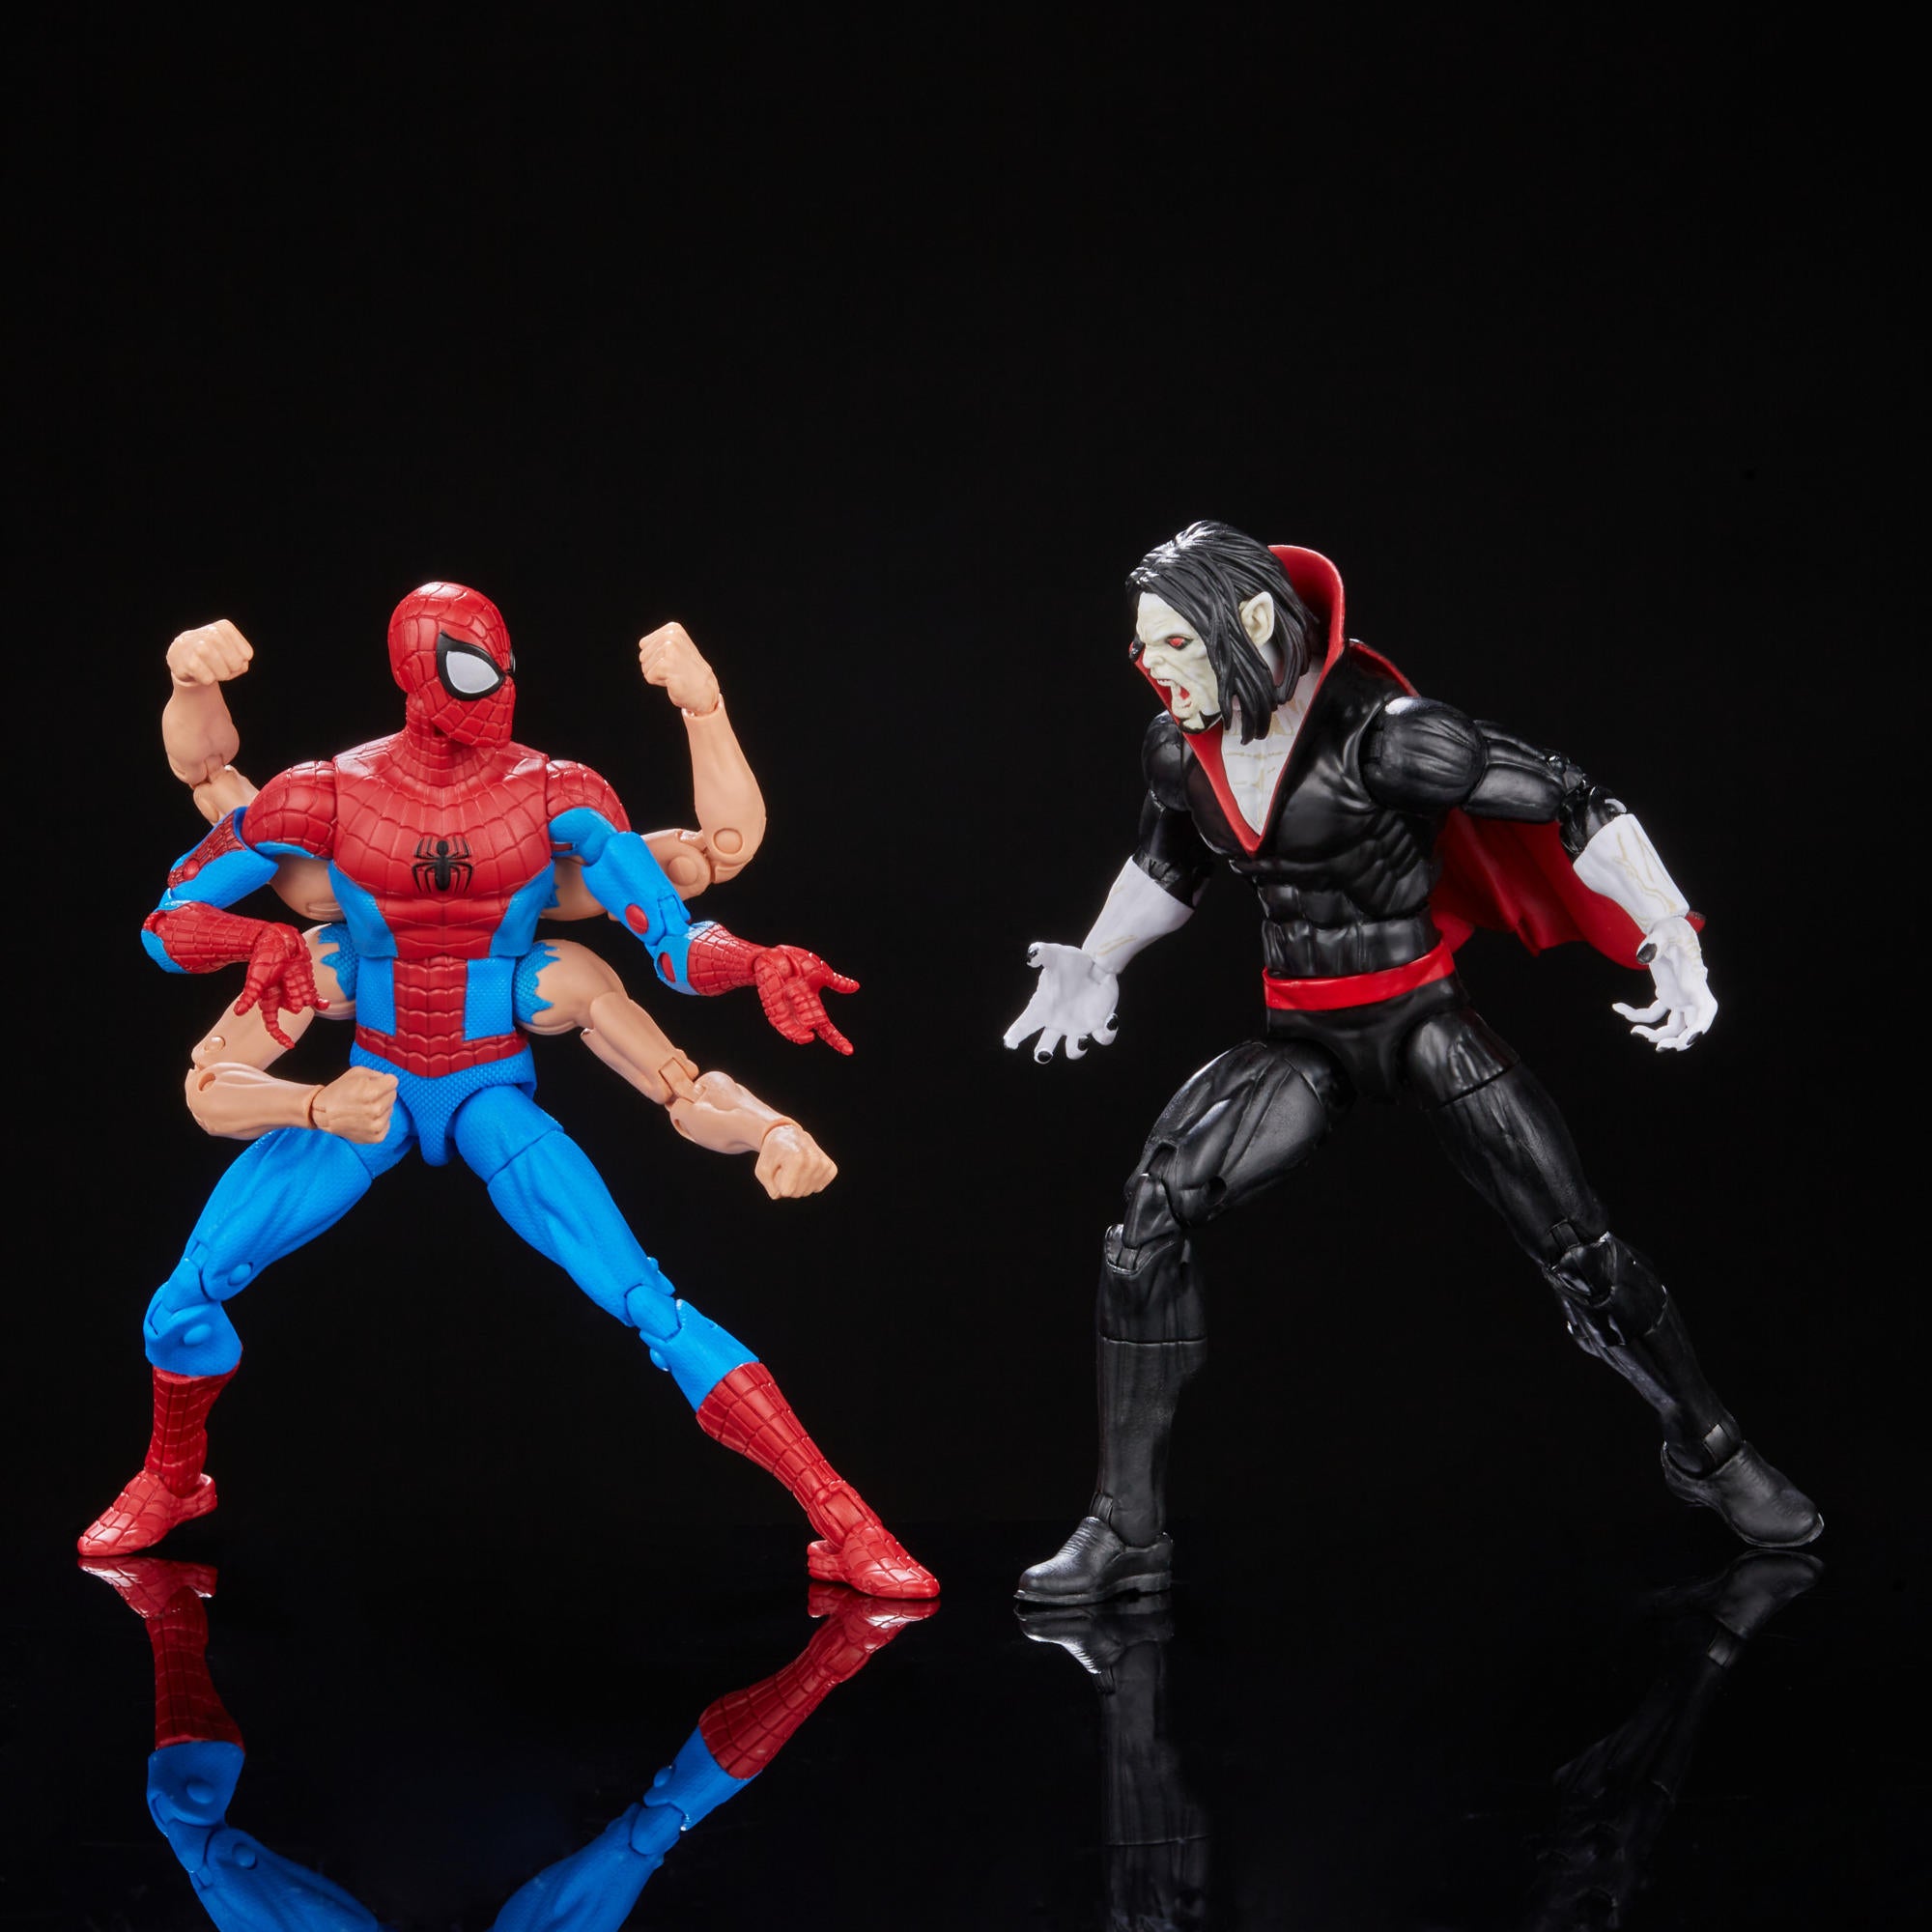 Marvel Legends Spider-Man vs Morbius 2-Pack Pre-Orders Launch at